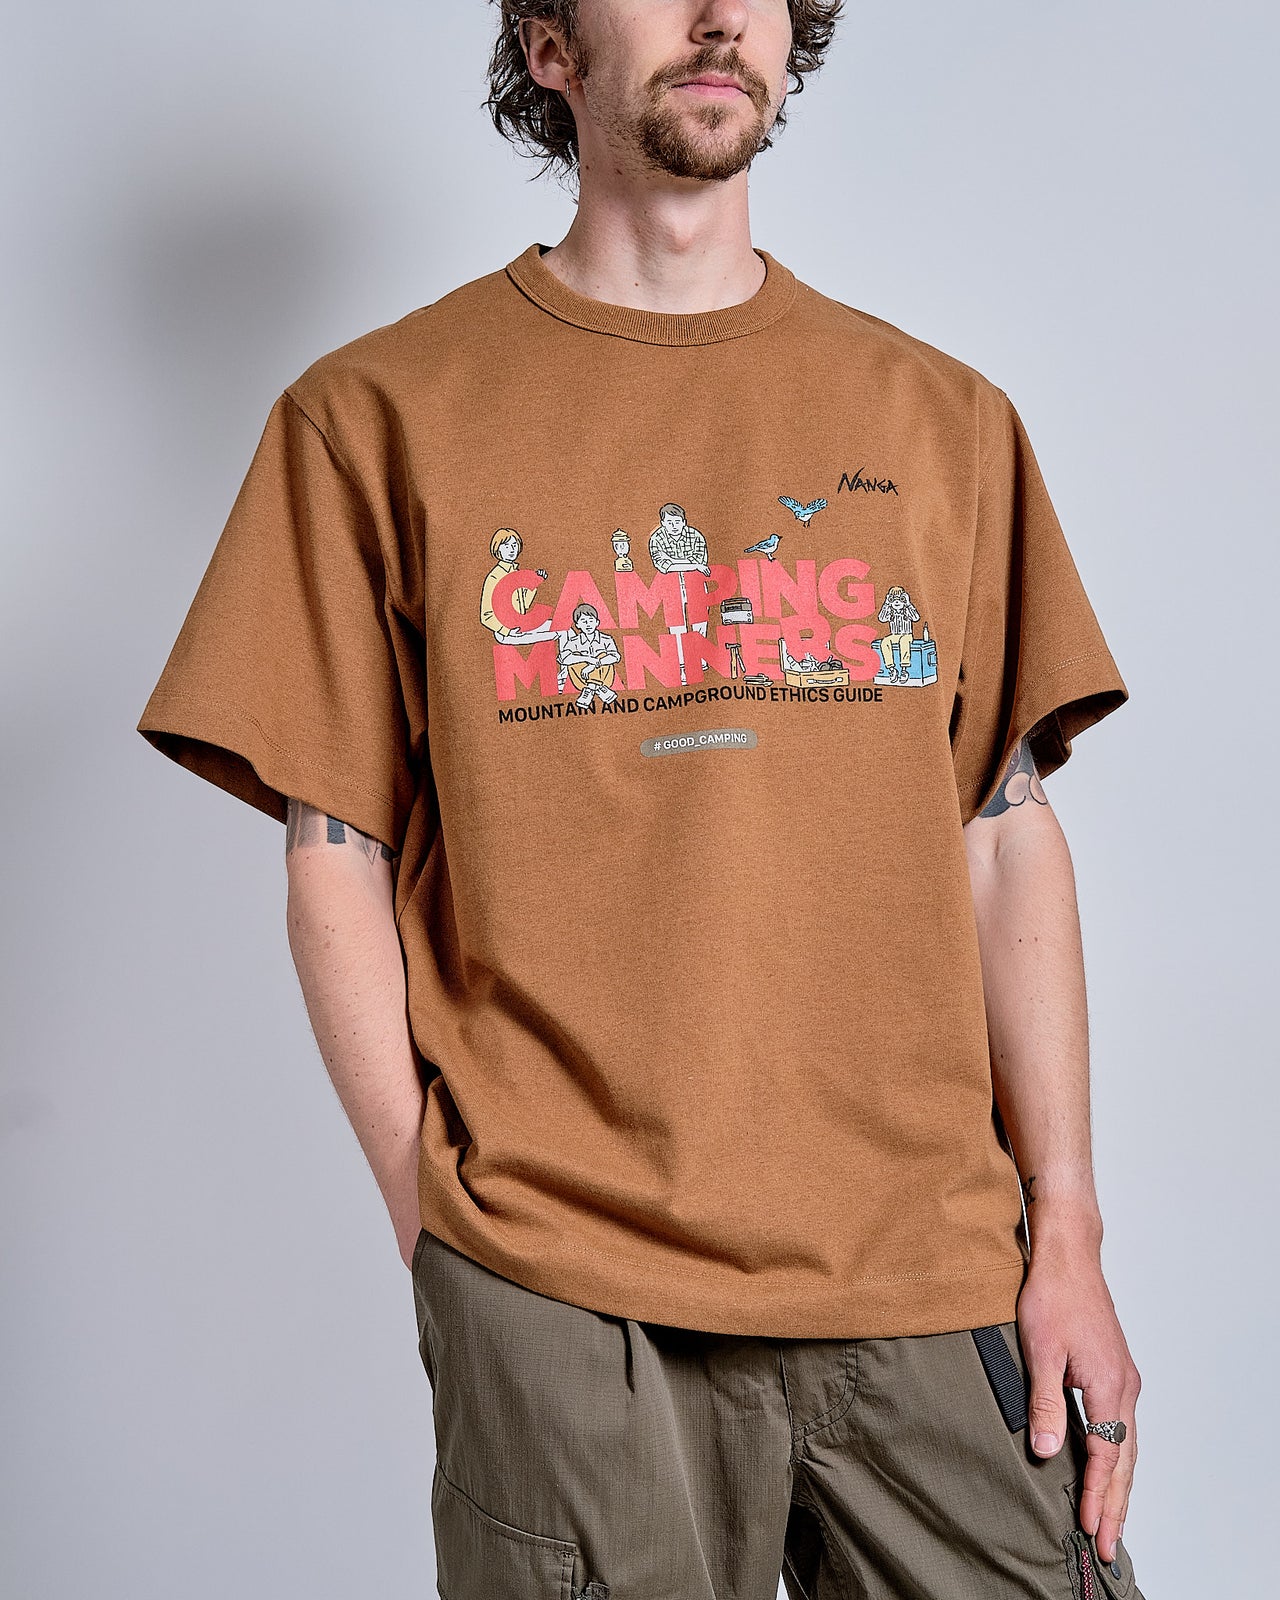 Eco Hybrid Camping Manners Shirt in Camel